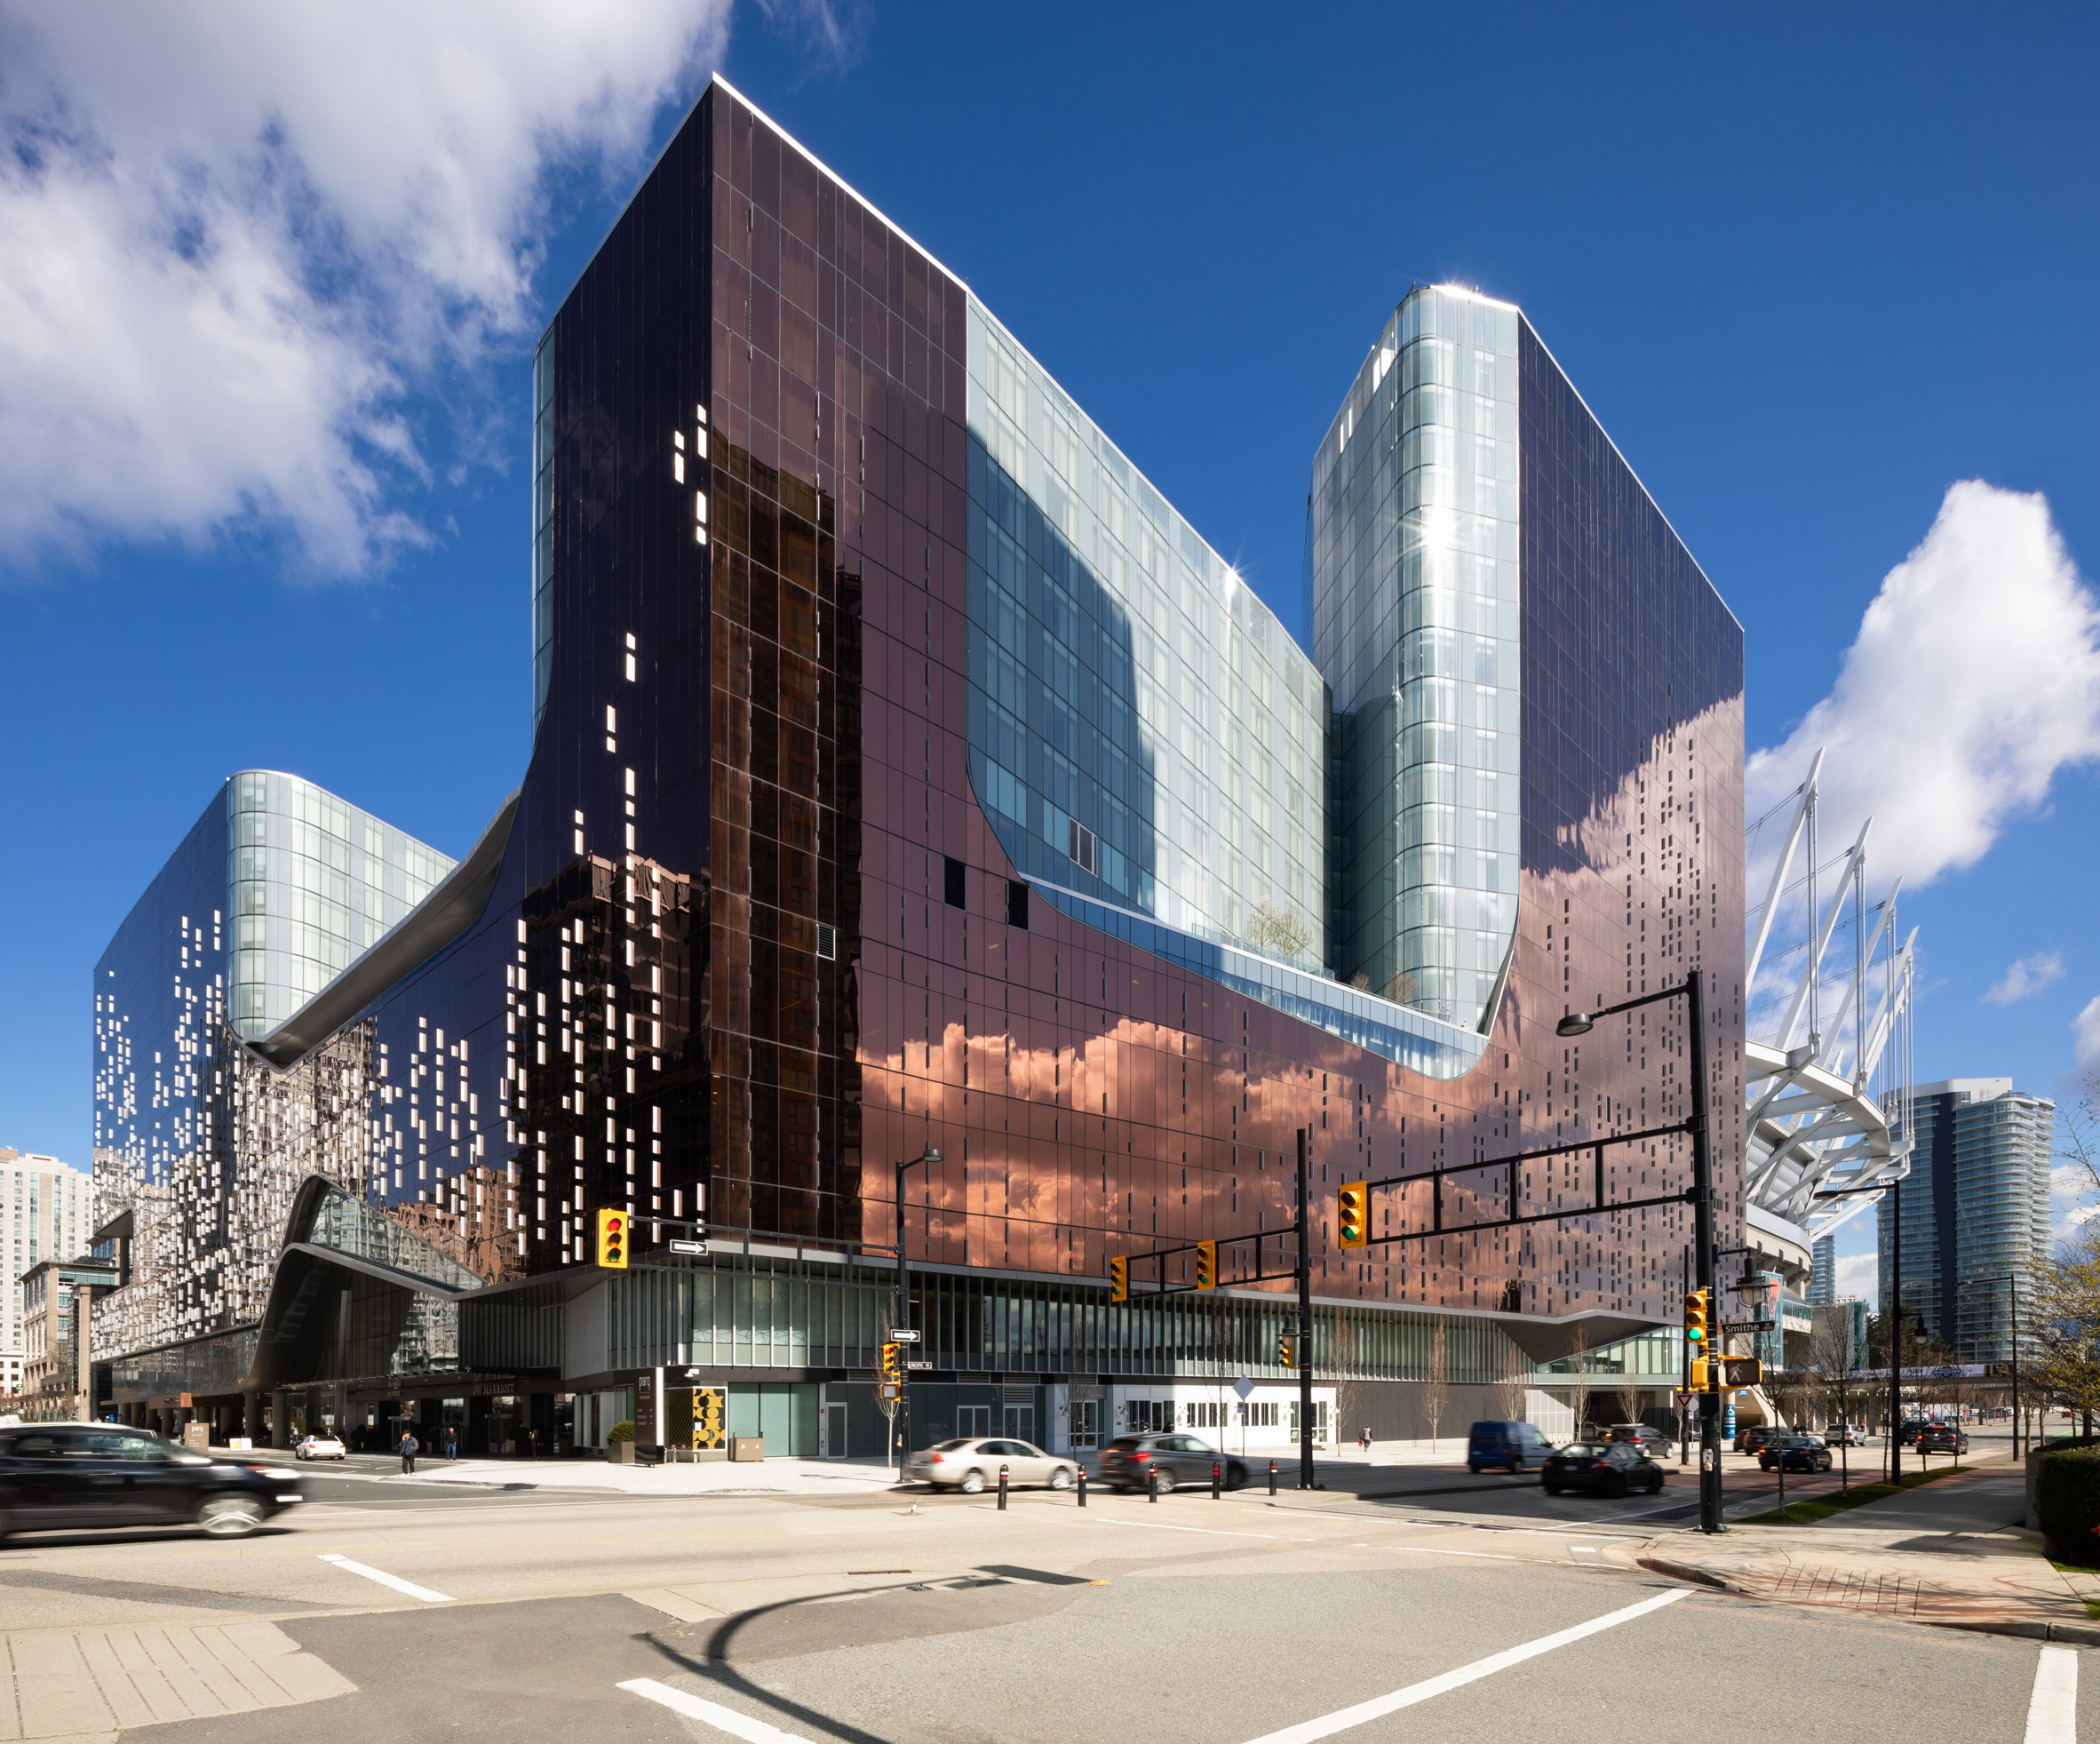 Massive coppery Parq complex sits beside Vancouver's main sports arena